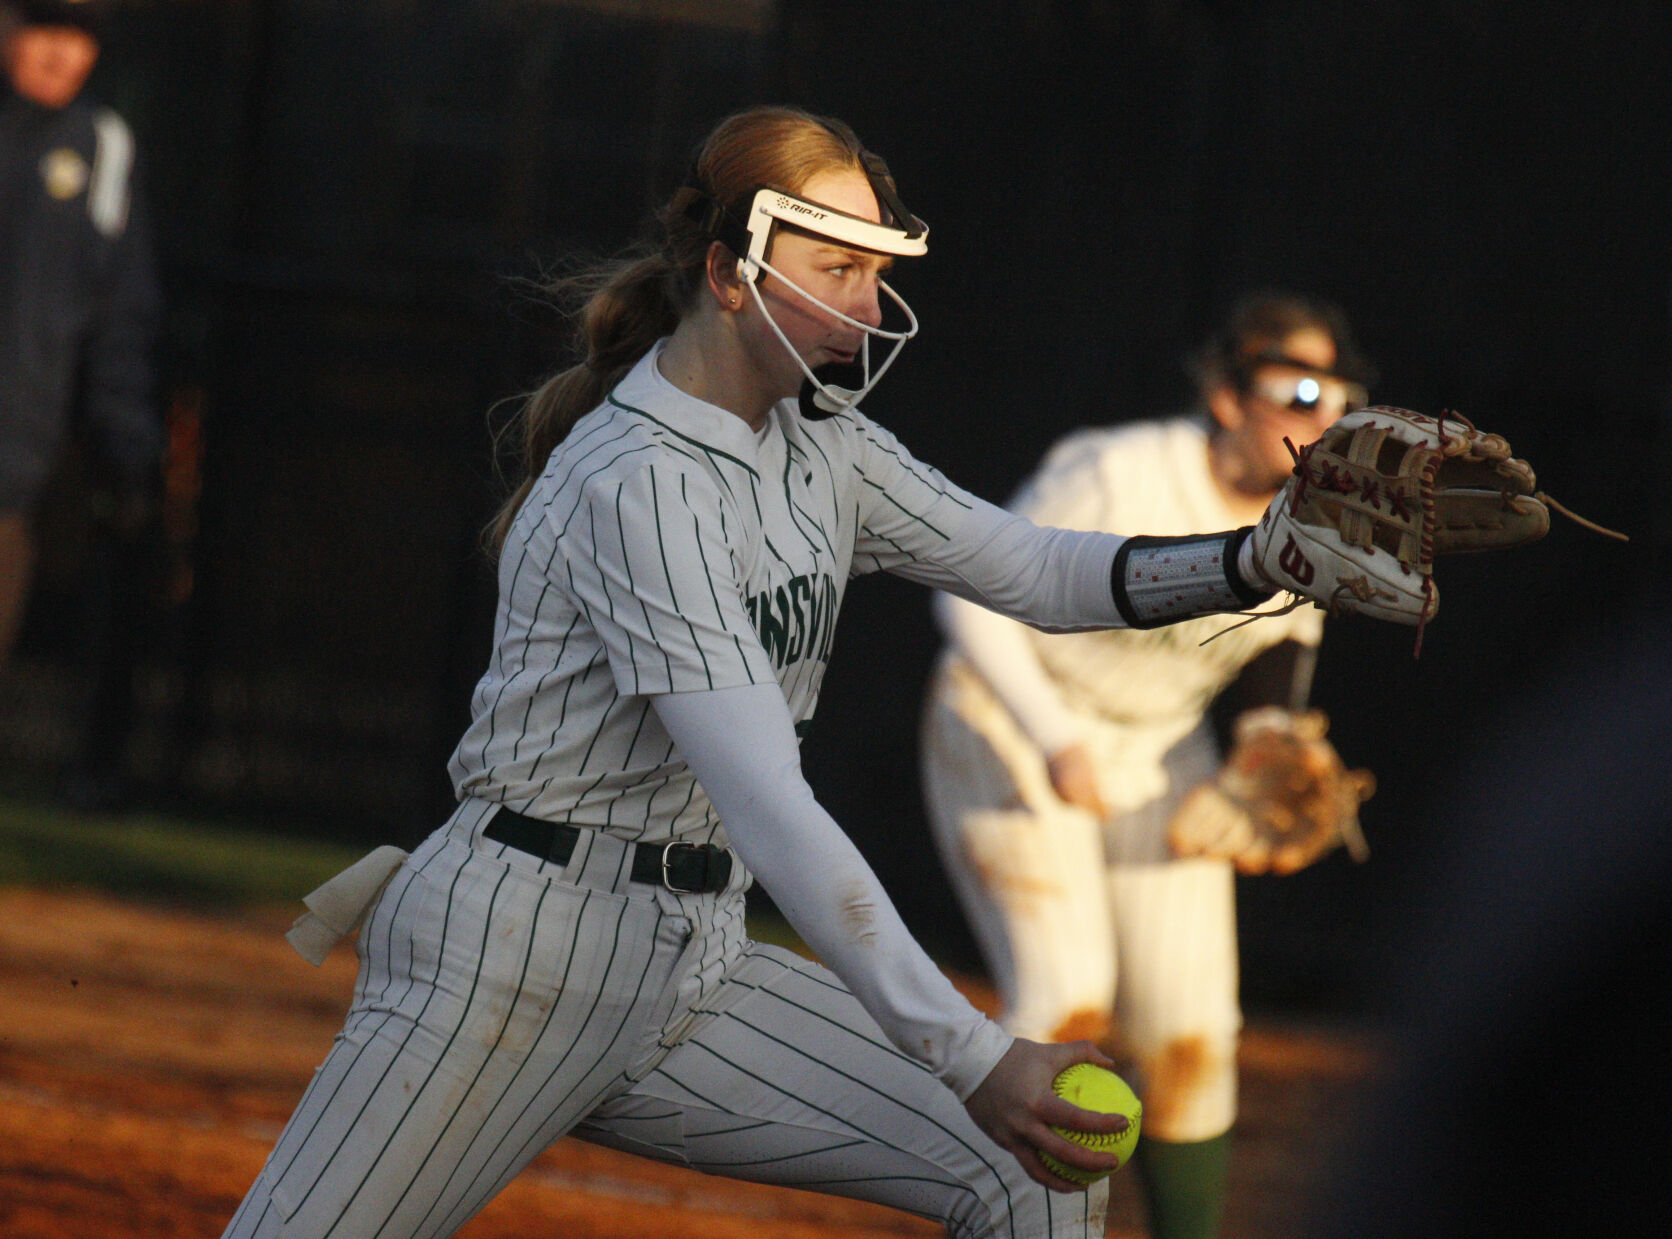 Zionsville Softball Soars to 4-0 Led by Helton and Geib’s Heroics